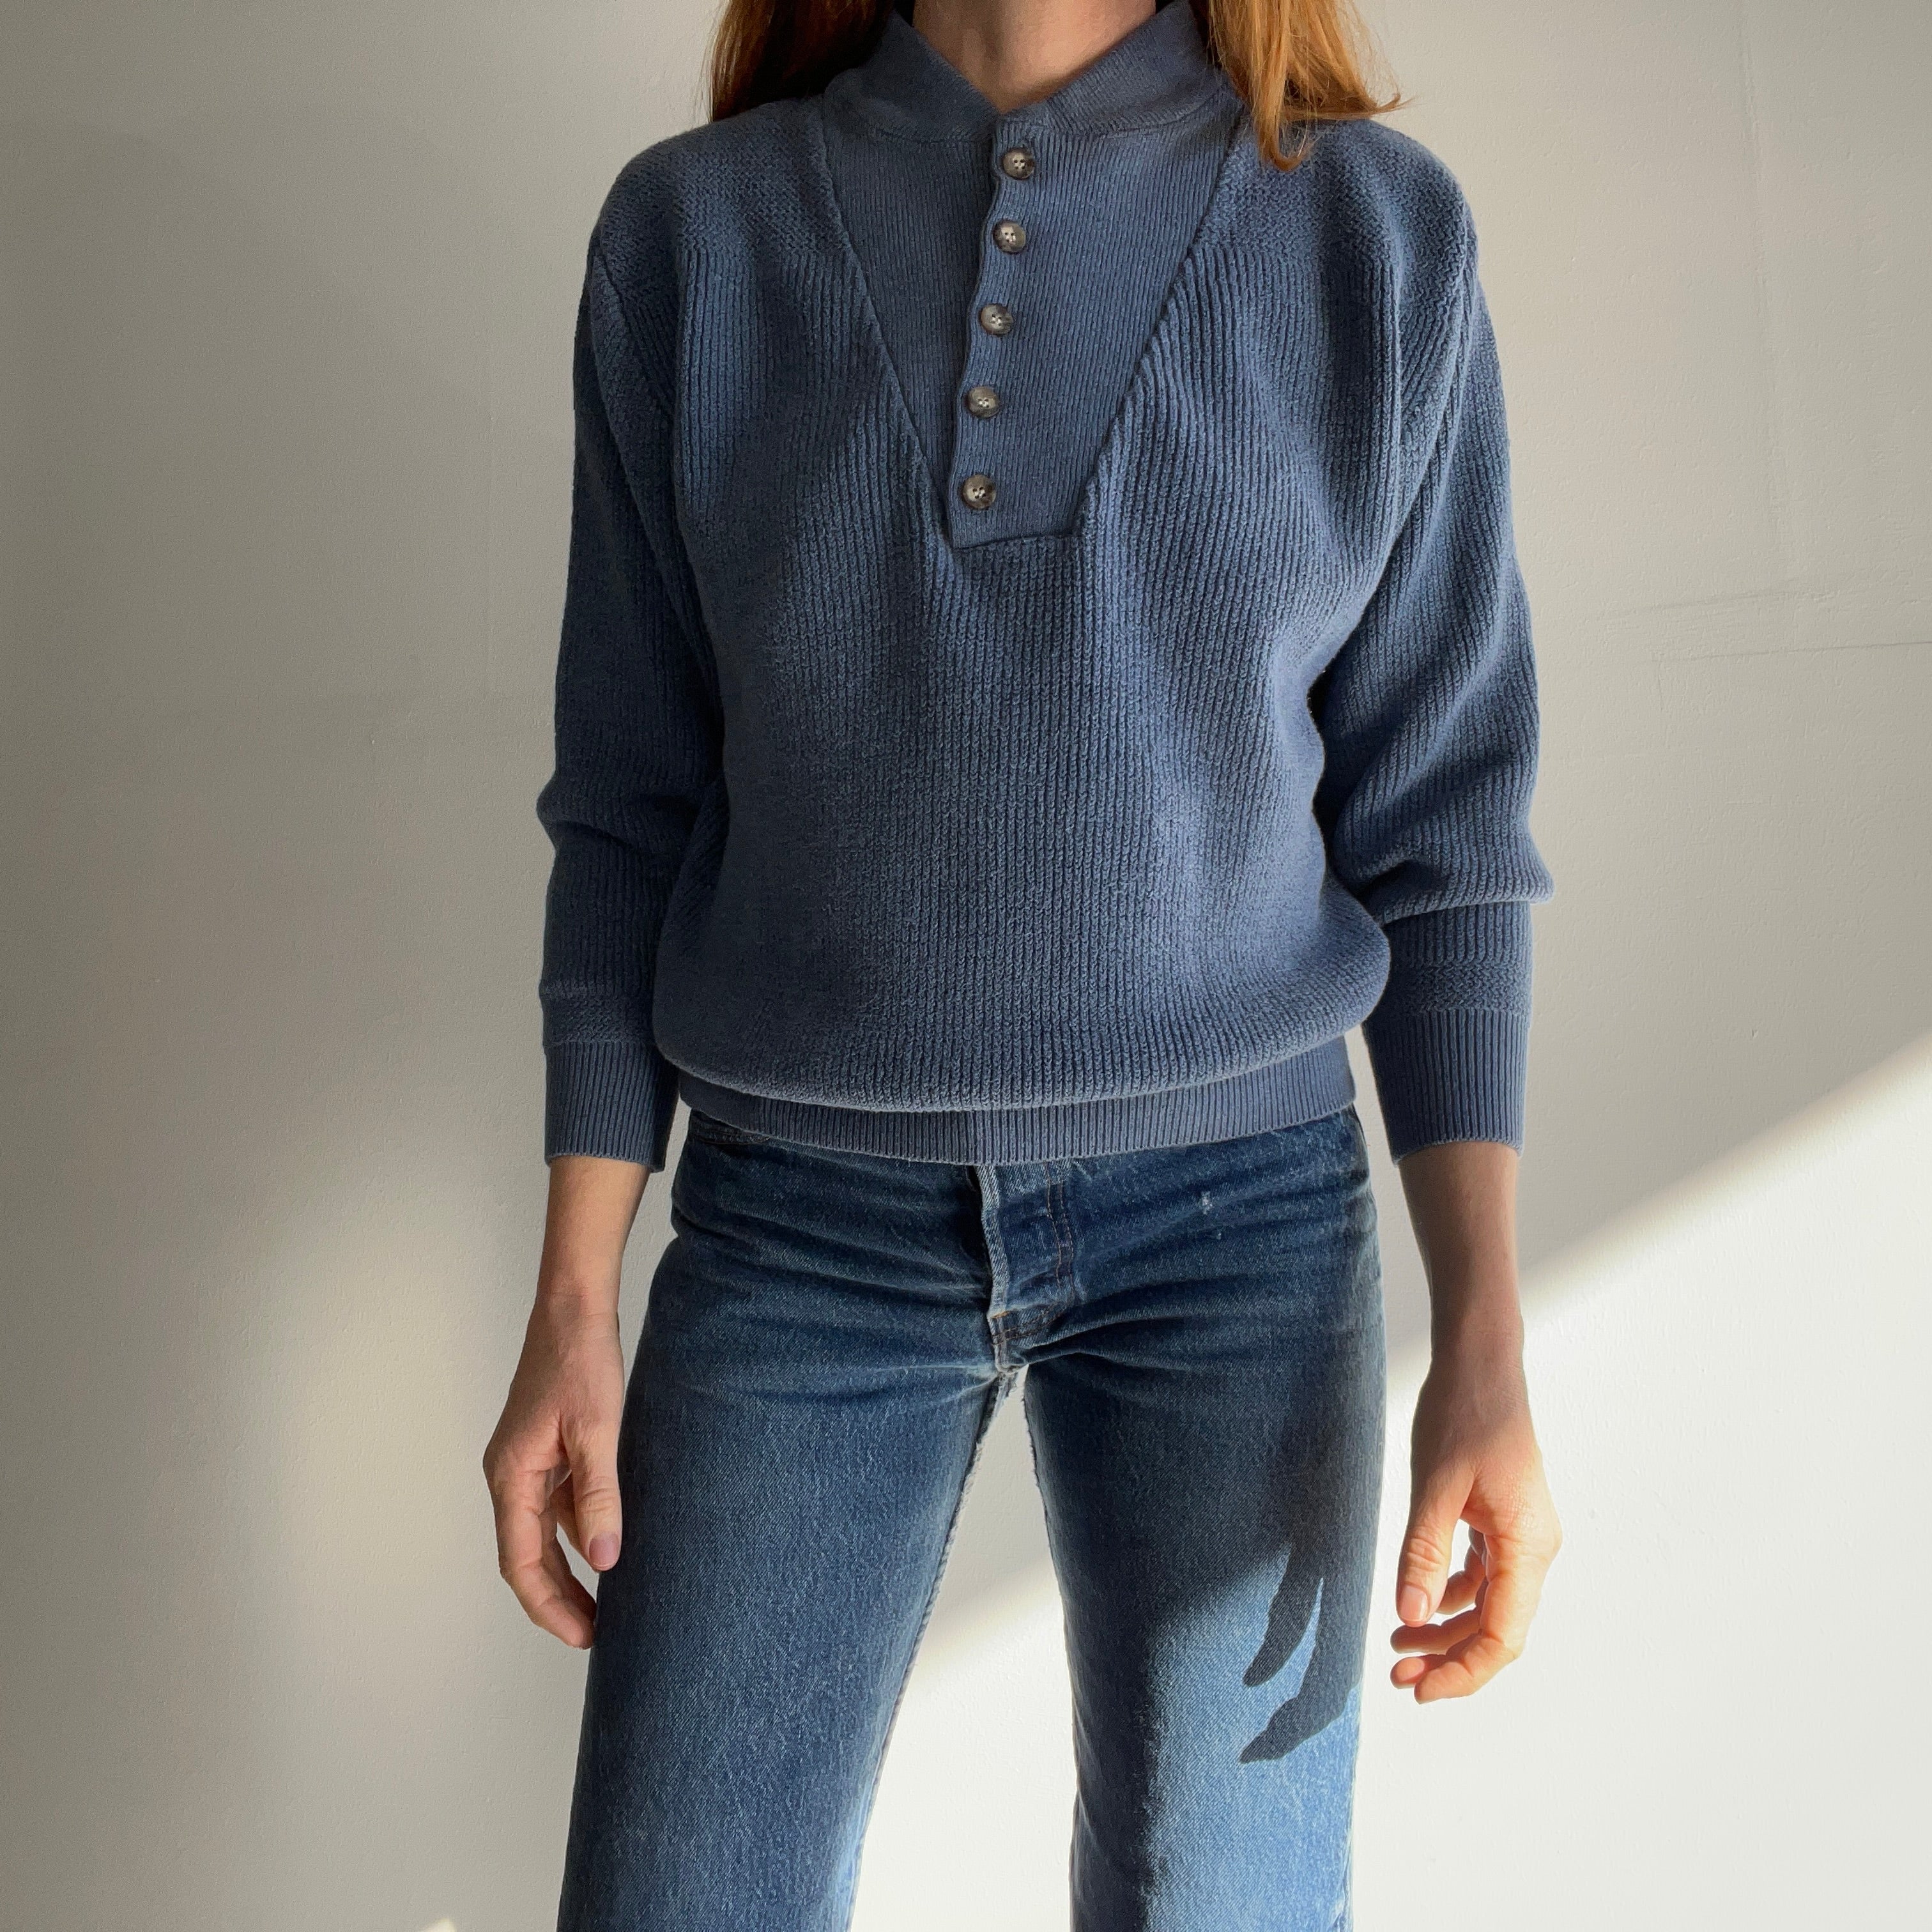 1990s L.L. Bean Baby Blue Mostly Cotton Knit Sweater